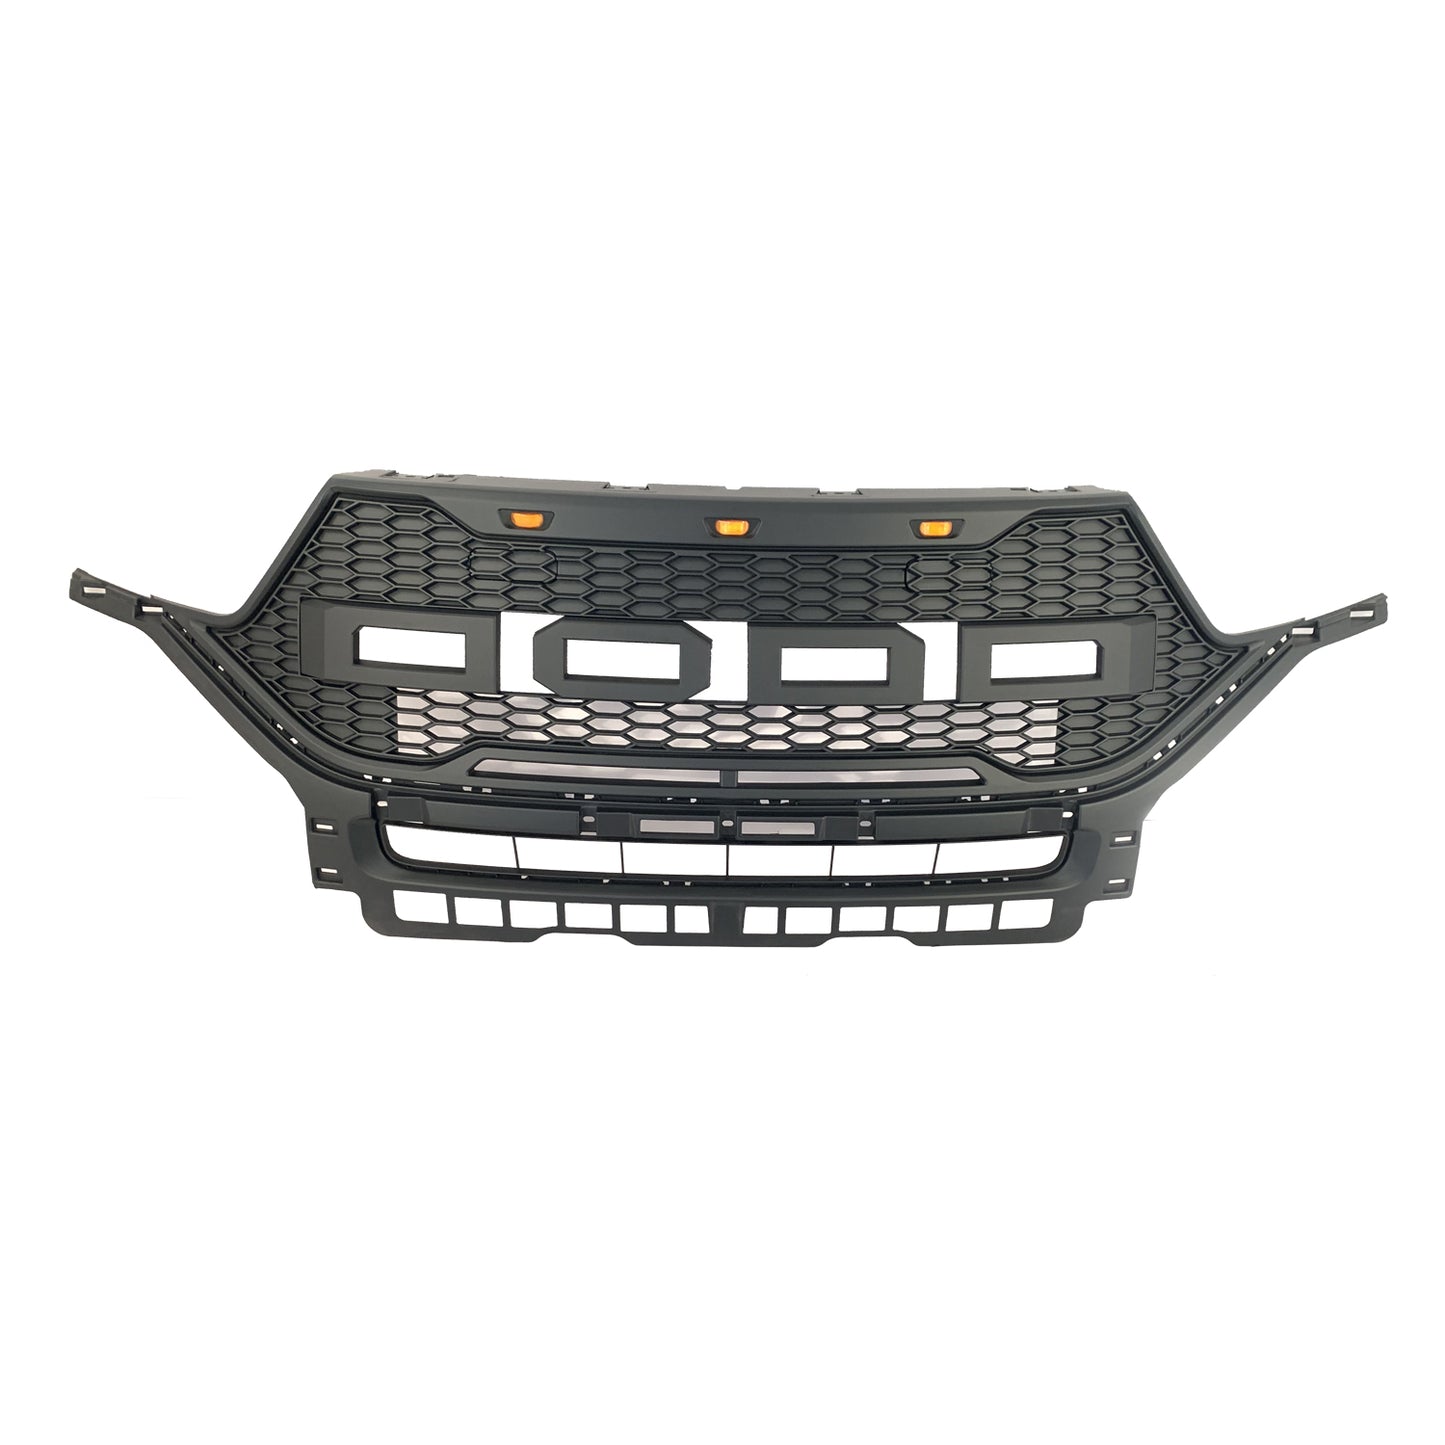 Front Grille Fits for Ford Explorer 2020 Grill with 3 Amber LED Lights